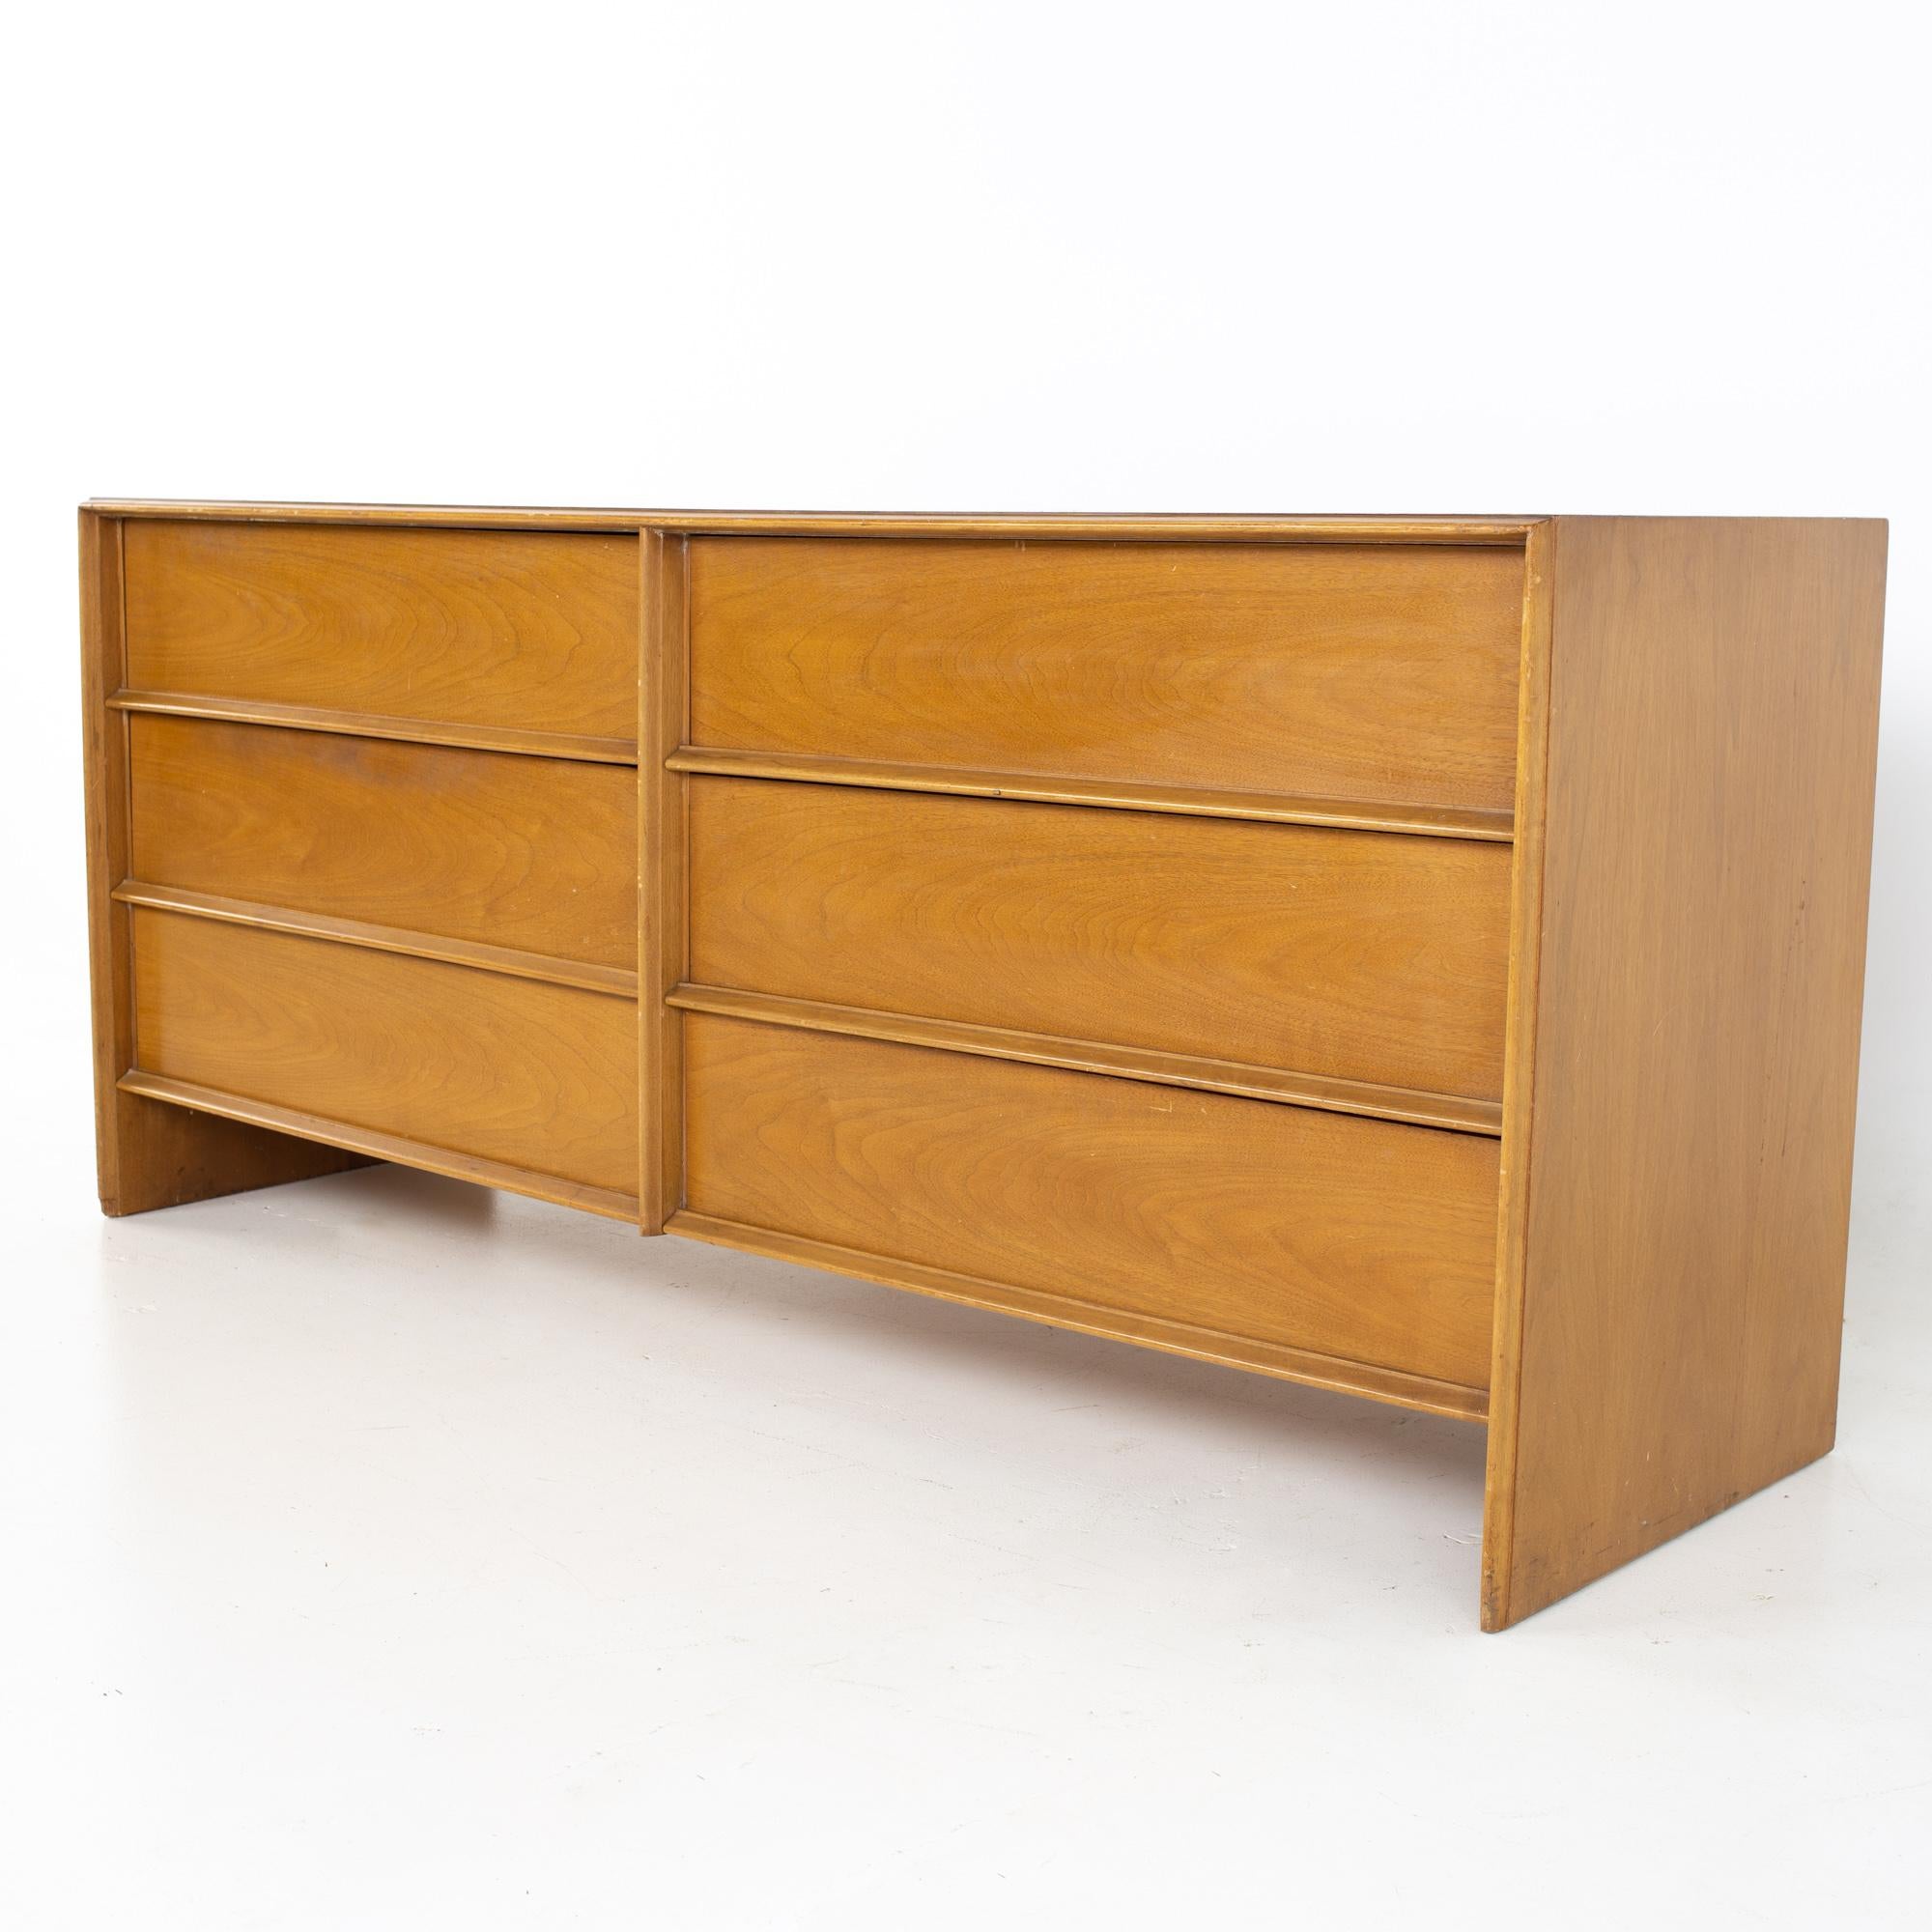 Robsjohn Gibbings for Widdicomb Mid Century blonde lowboy dresser
Dresser measures: 68 wide x 21.5 deep x 30.5 inches high

All pieces of furniture can be had in what we call restored vintage condition. That means the piece is restored upon